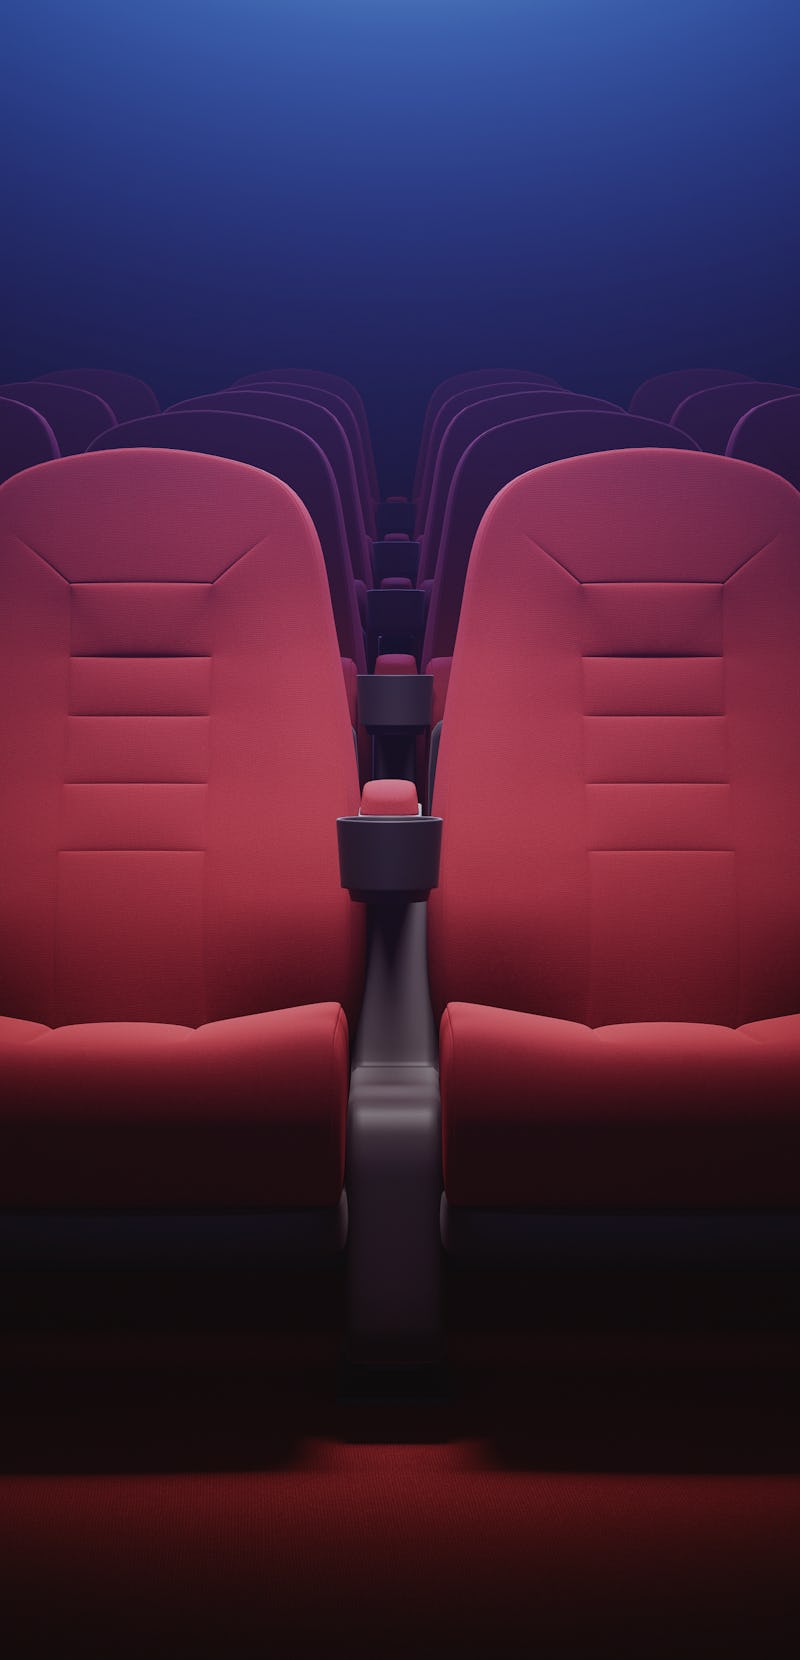 Interior of empty cinema with rows of red seats with cup holders and popcorn. Concept of entertainme...